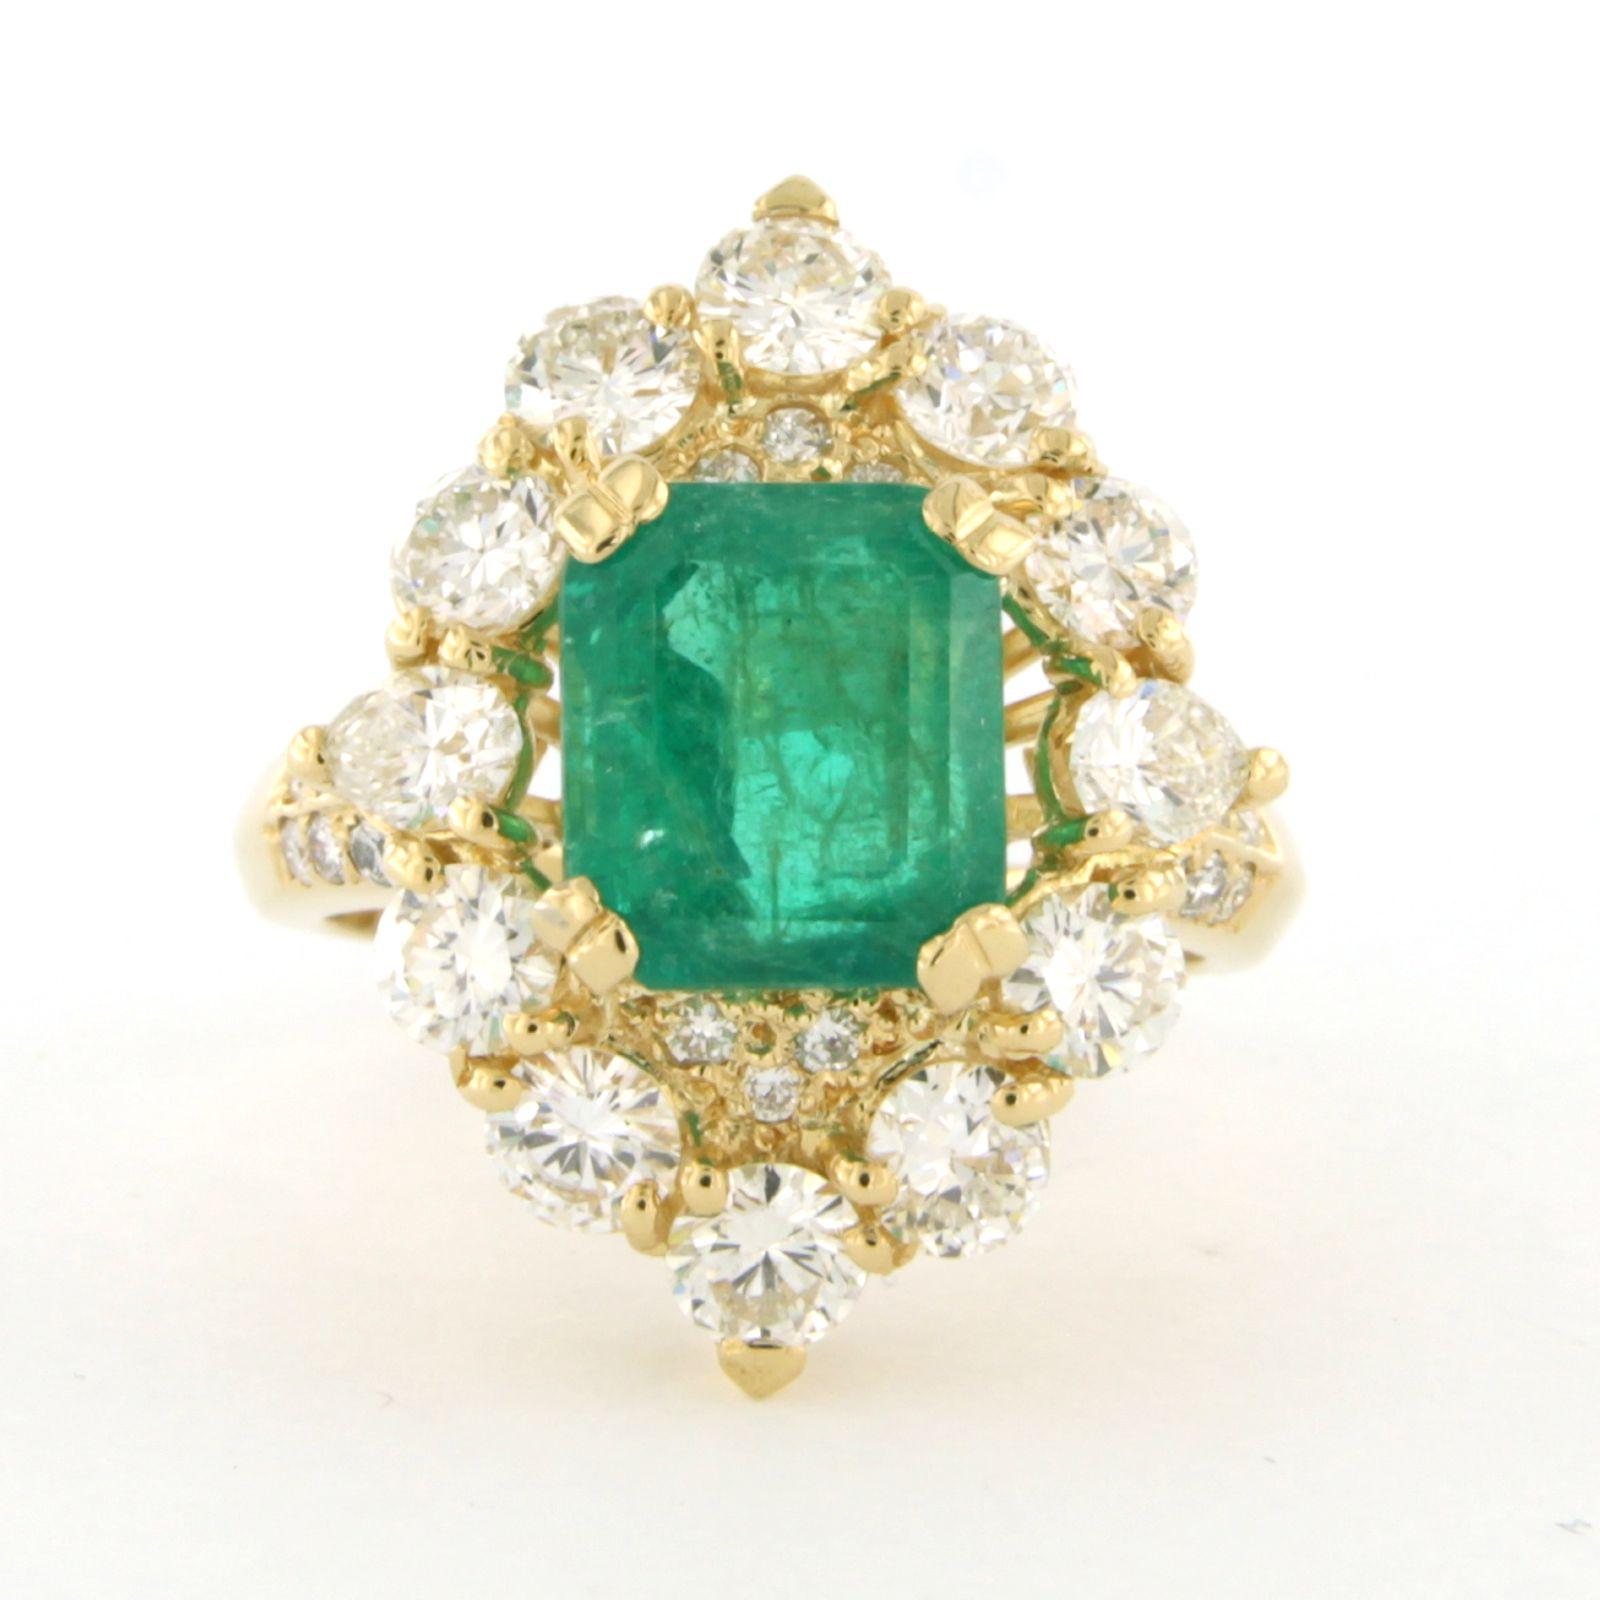 18k yellow gold ring set with emerald to. 3.30ct and pear shape and brilliant cut diamond up to. 2.50ct – G/H – VS/SI – ring size U.S. 6.75 – EU. 17.25(54)

detailed description:

The top of the ring is 2.3 cm by 1.8 cm wide by 1.1 cm high

Ring